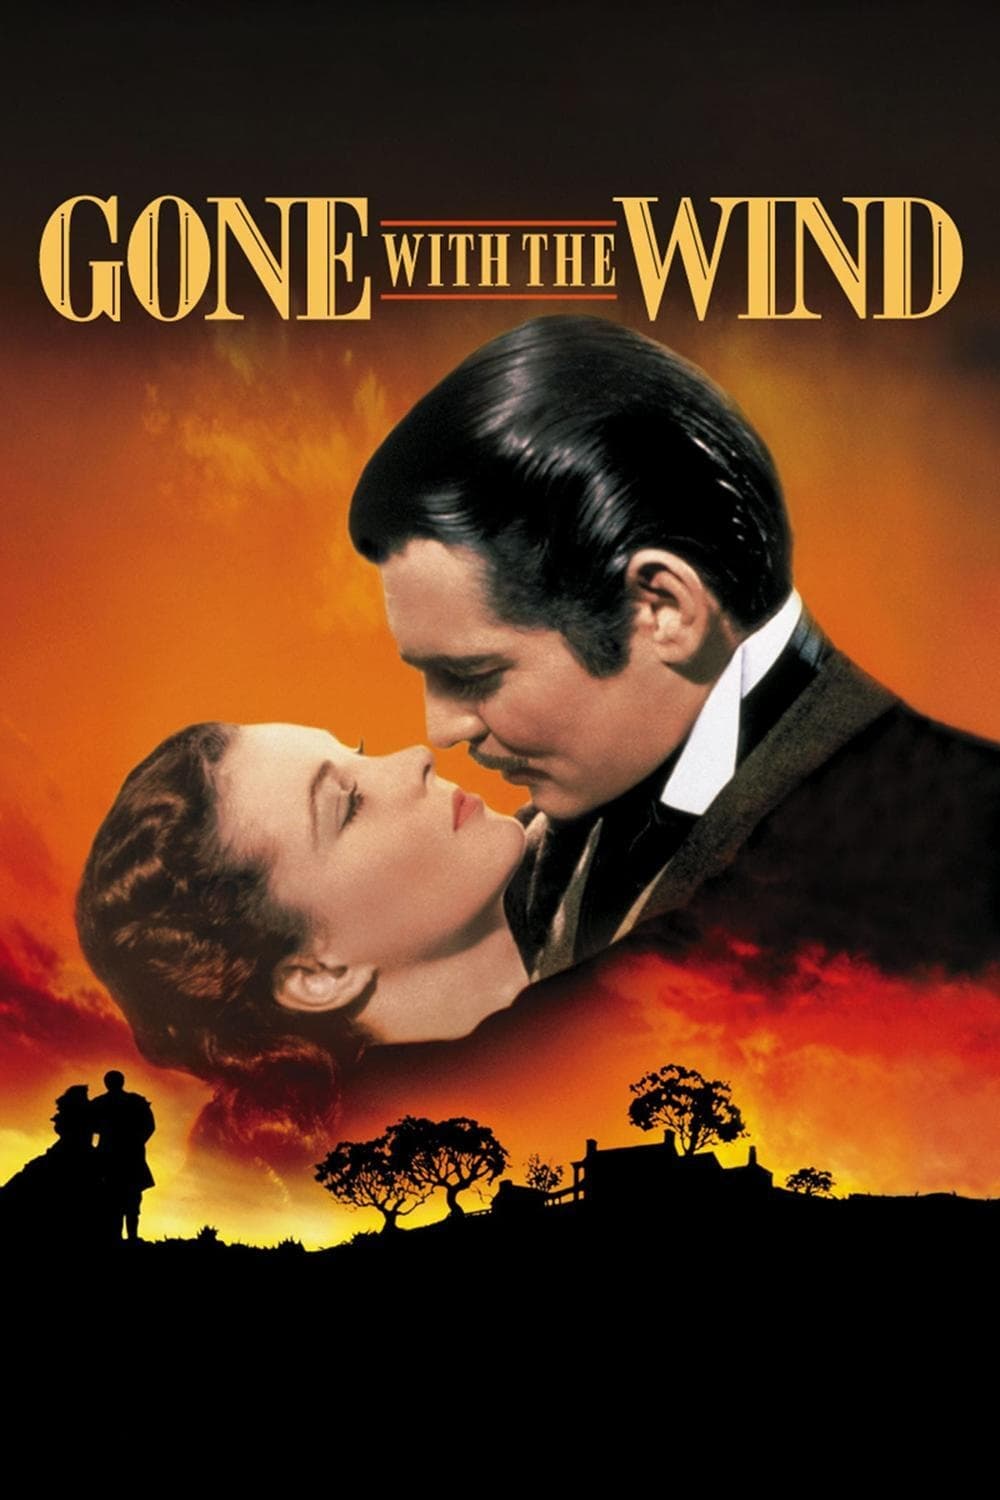 gone with the wind 風と共に去りぬ 乱世佳人 - 洋書